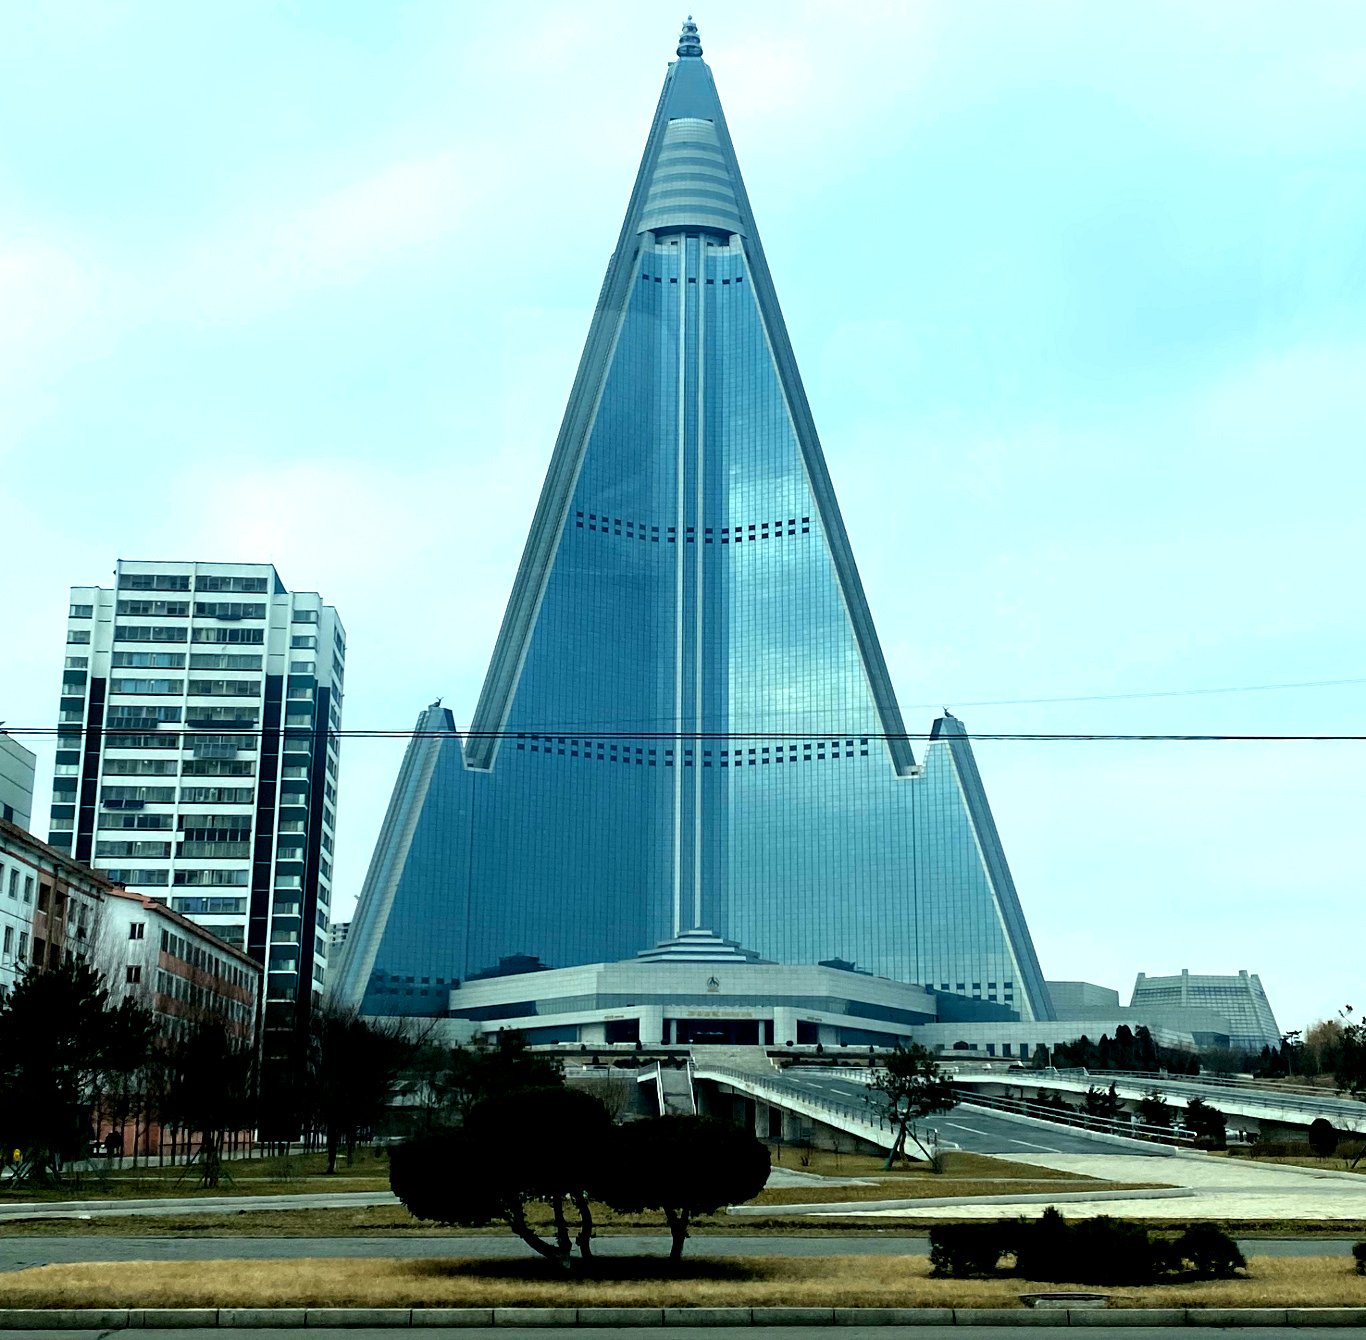 The Ryugyong hotel seen in 2020. Tour arranged by KTG Tours